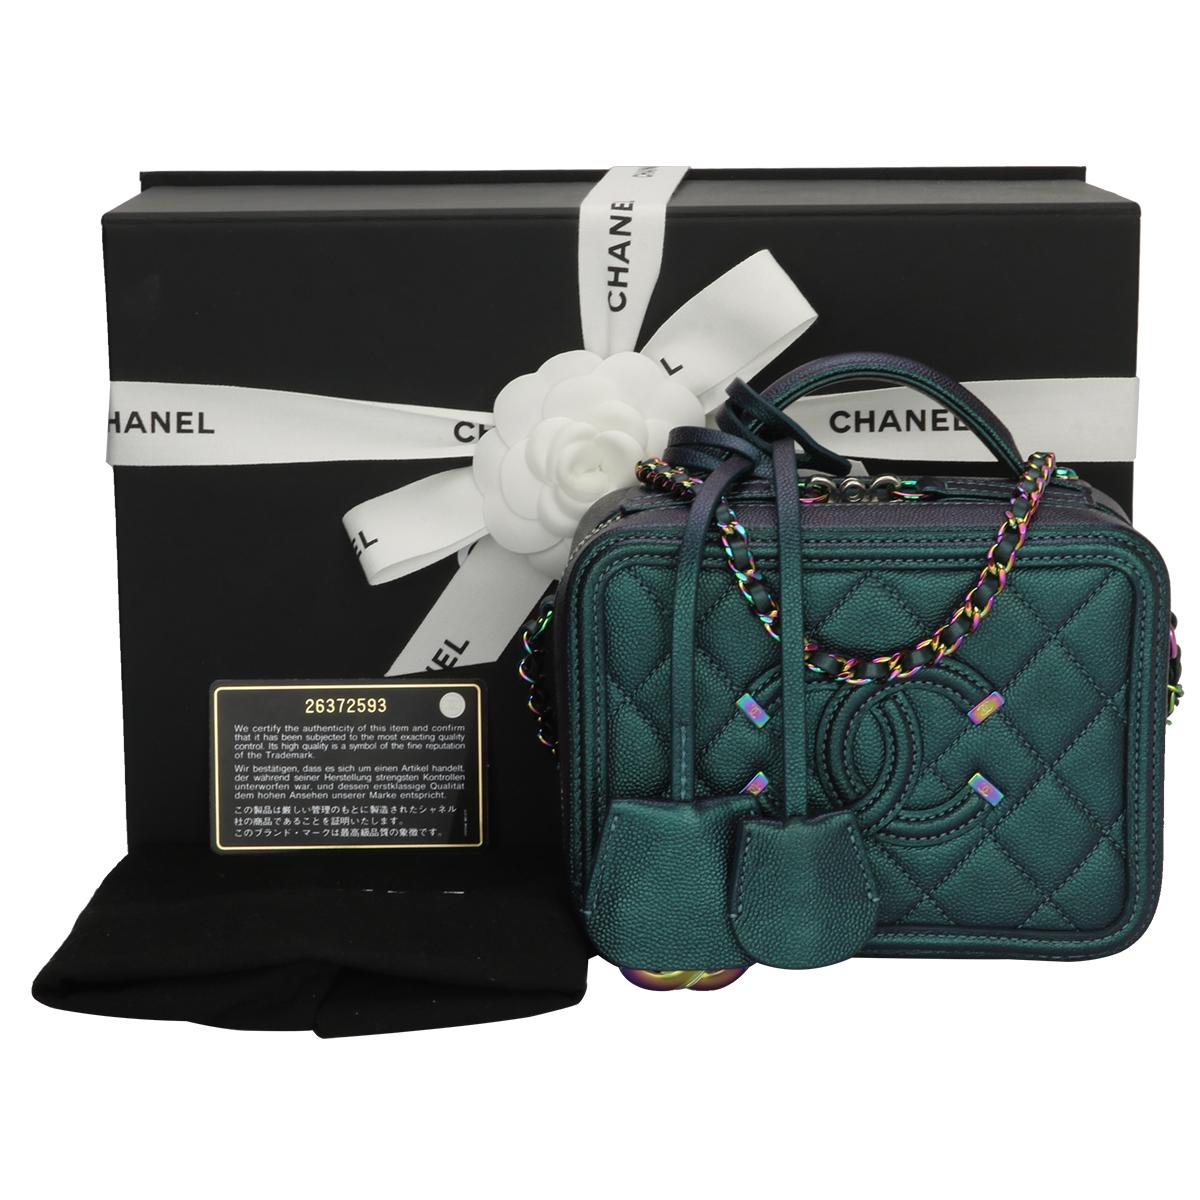 Authentic CHANEL Small CC Filigree Vanity Case Iridescent Dark Turquoise Caviar with Rainbow Hardware 2018.

This stunning bag is in a pristine condition, the bag still holds its original shape, and the hardware is still very shiny.

Exterior